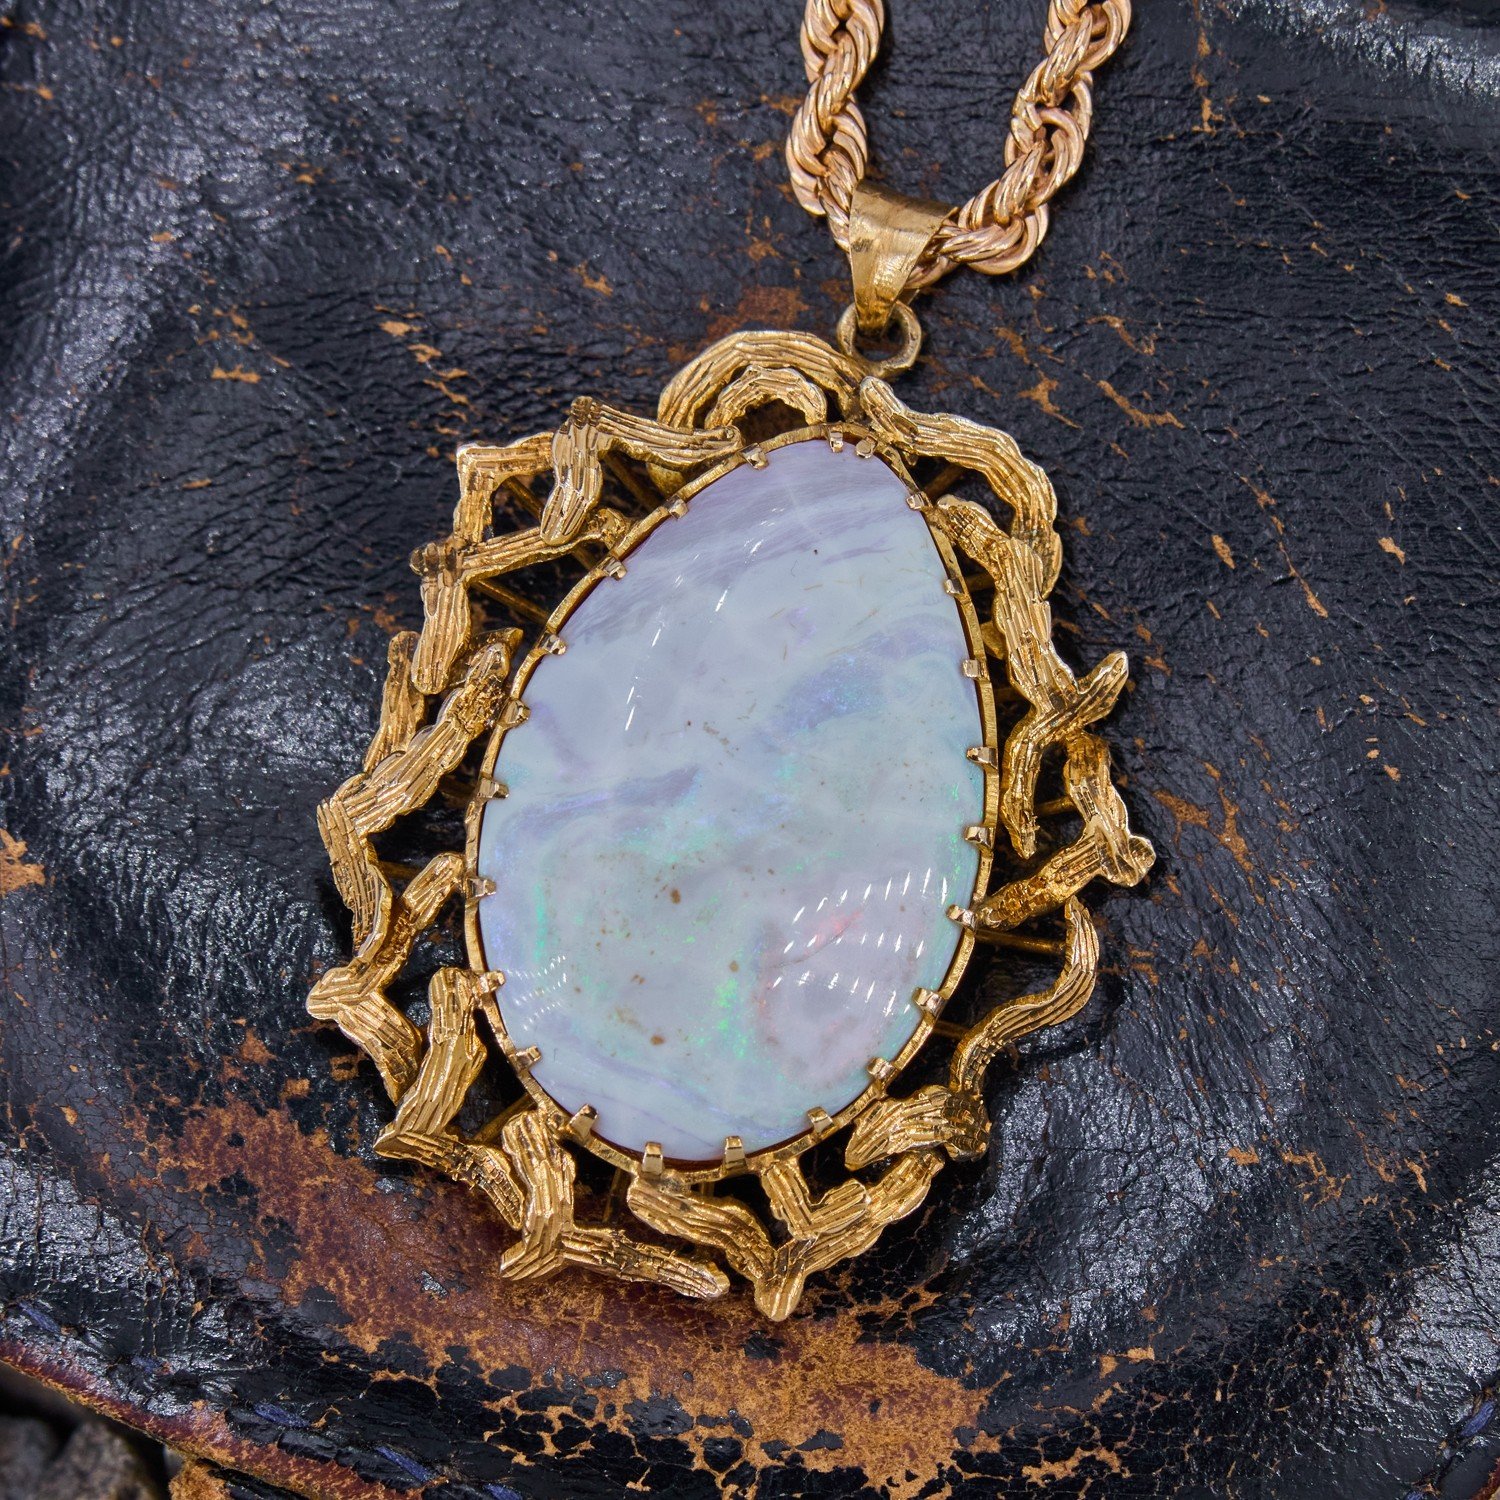 The superstitious history of opal jewellery | The Jewellery Editor